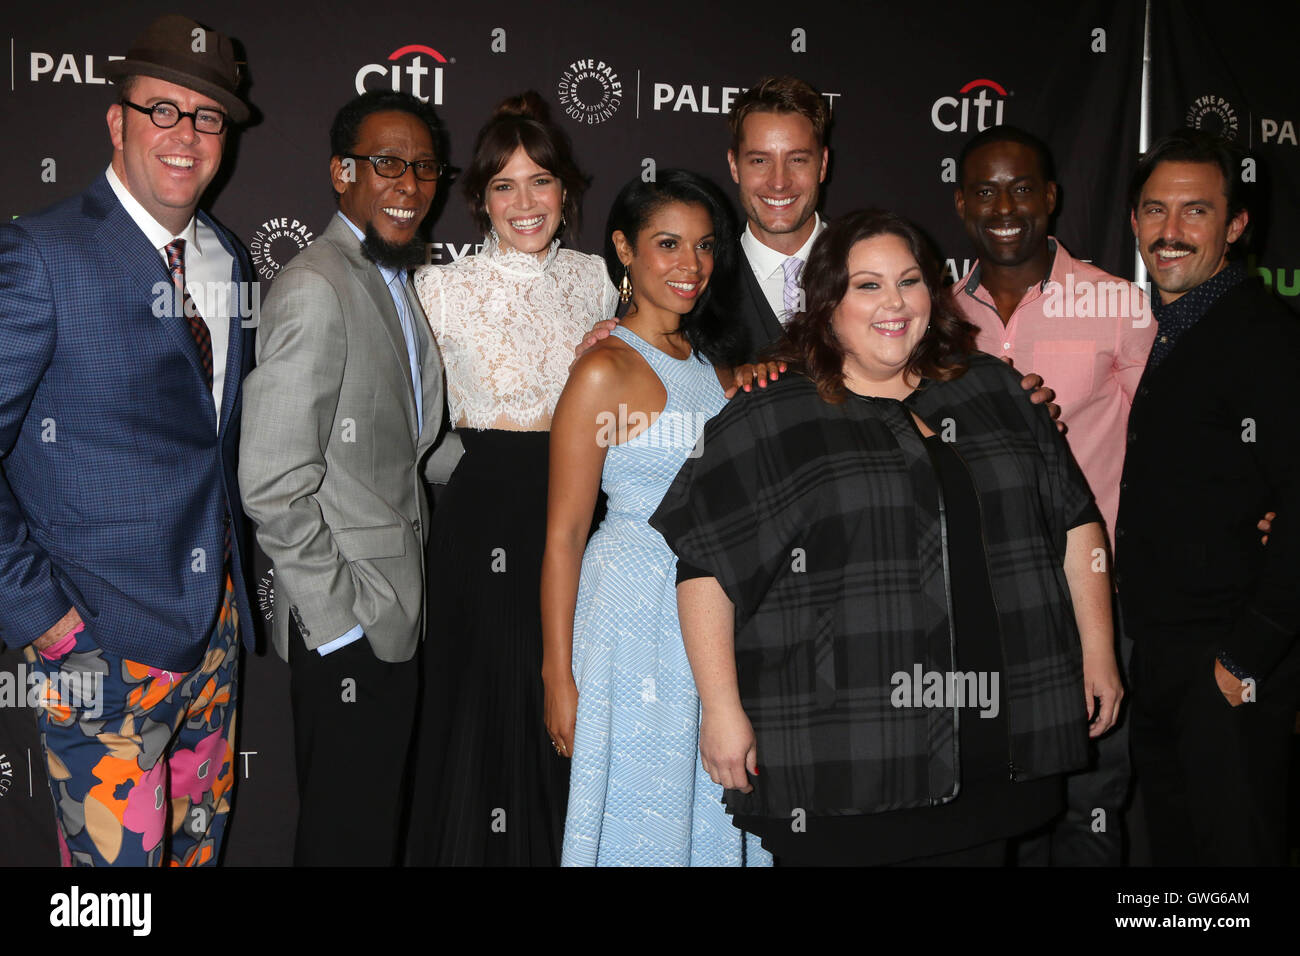 BEVERLY HILLS, CA - SEPTEMBER 13: Chris Sullivan, Ron Cephas Jones, Mandy Moore, Susan Kelechi Watson, Justin Hartley, Chrissy Metz, Sterling K. Brown, Milo Ventimiglia at the PaleyFest 2016 Fall TV Preview featuring NBC at the Paley Center For Media in Beverly Hills, California on September 13, 2016. Credit: David Edwards/MediaPunch Stock Photo